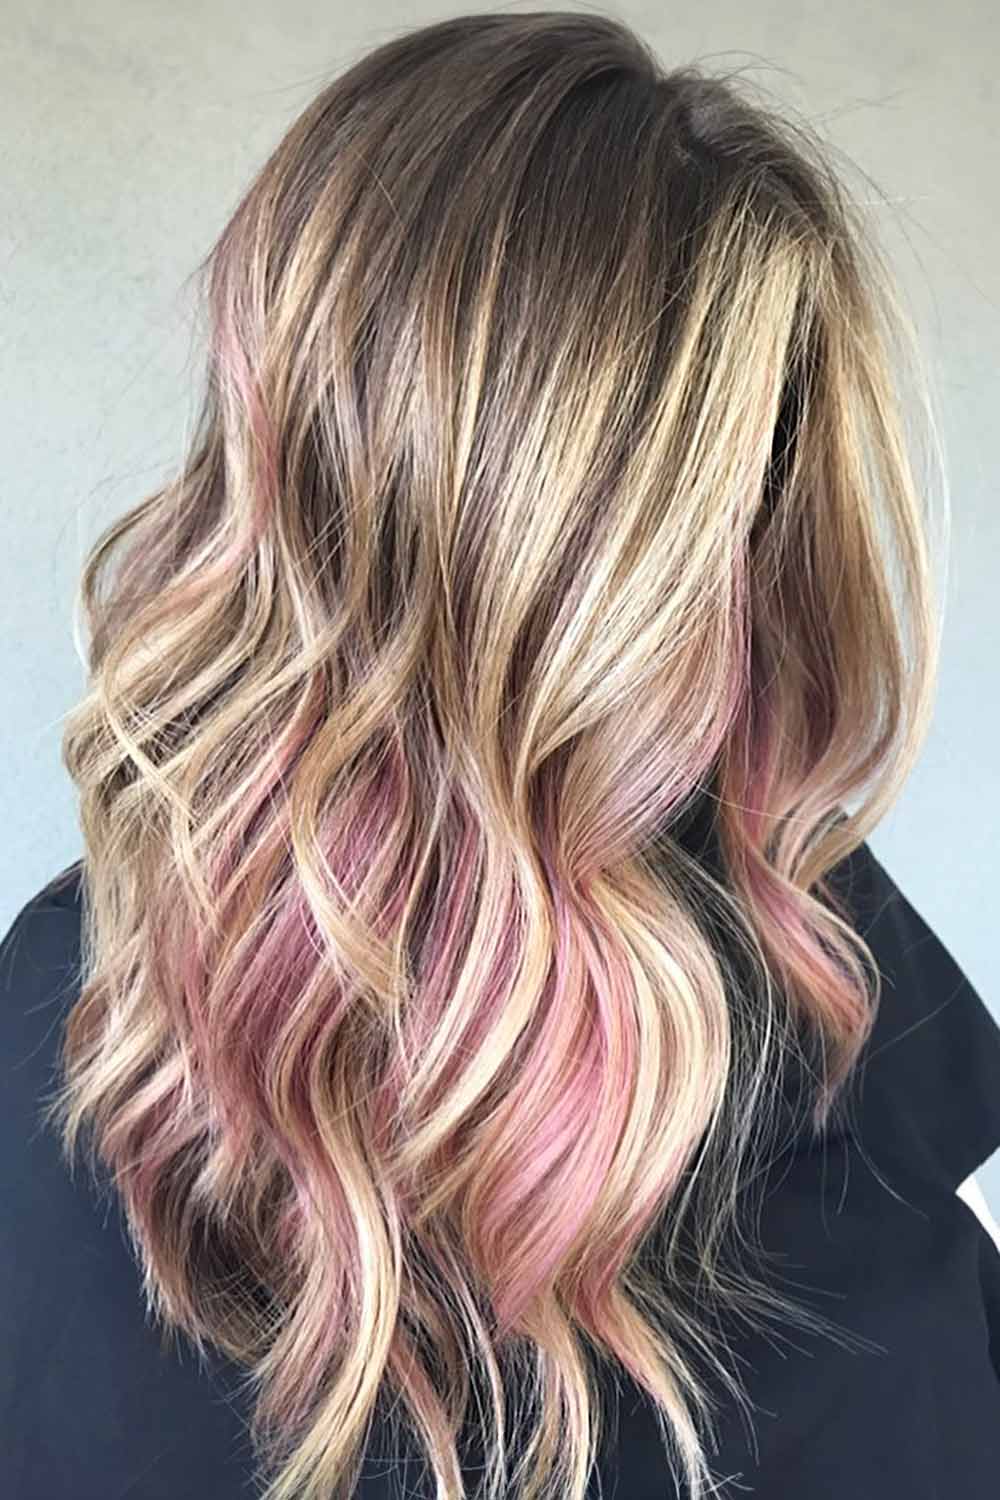 Dirty Blonde Hairstyles With Pink Highlights #dirtyblondehair #dirtyblonde #blondehair #blonde